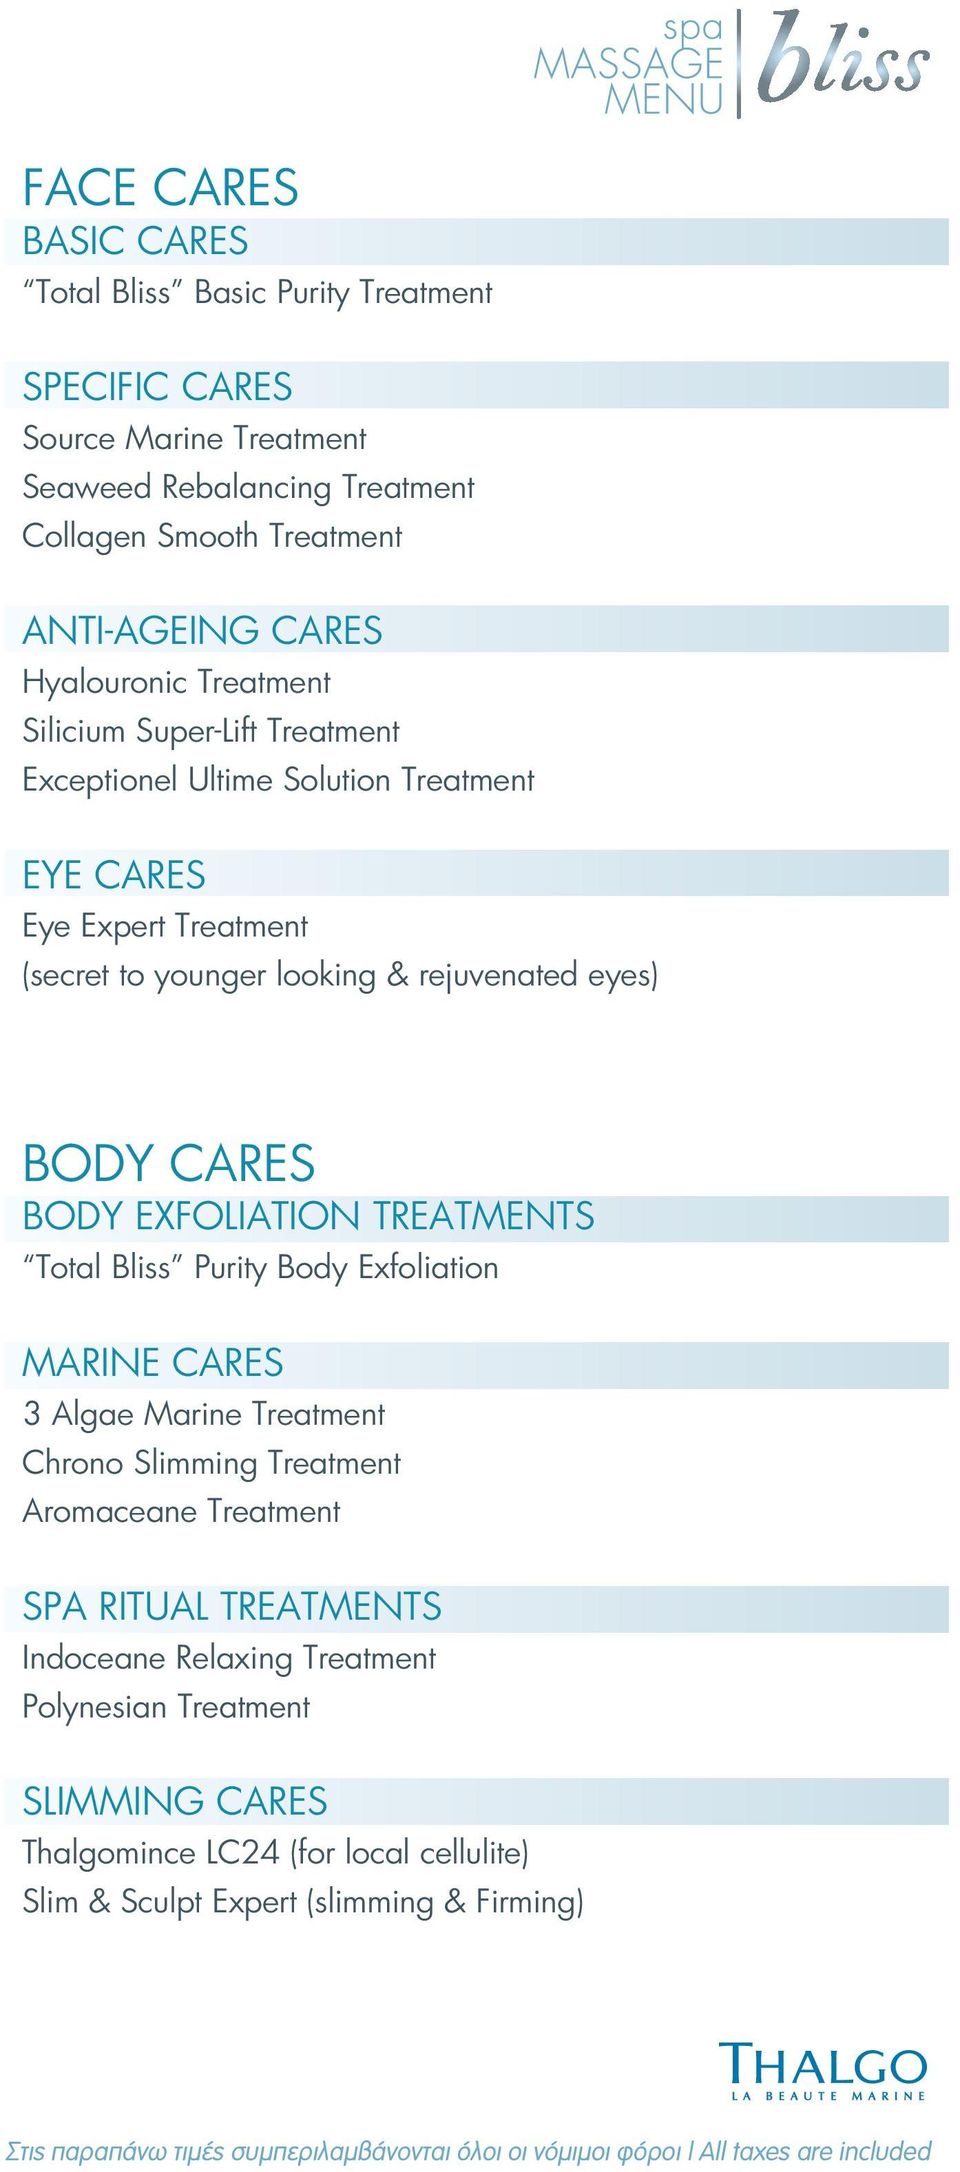 looking & rejuvenated eyes) BODY CARES BODY EXFOLIATION TREATMENTS Total Bliss Purity Body Exfoliation 30min 45 MARINE CARES 3 Algae Marine Treatment 45min 60 Chrono Slimming Treatment 45min 55